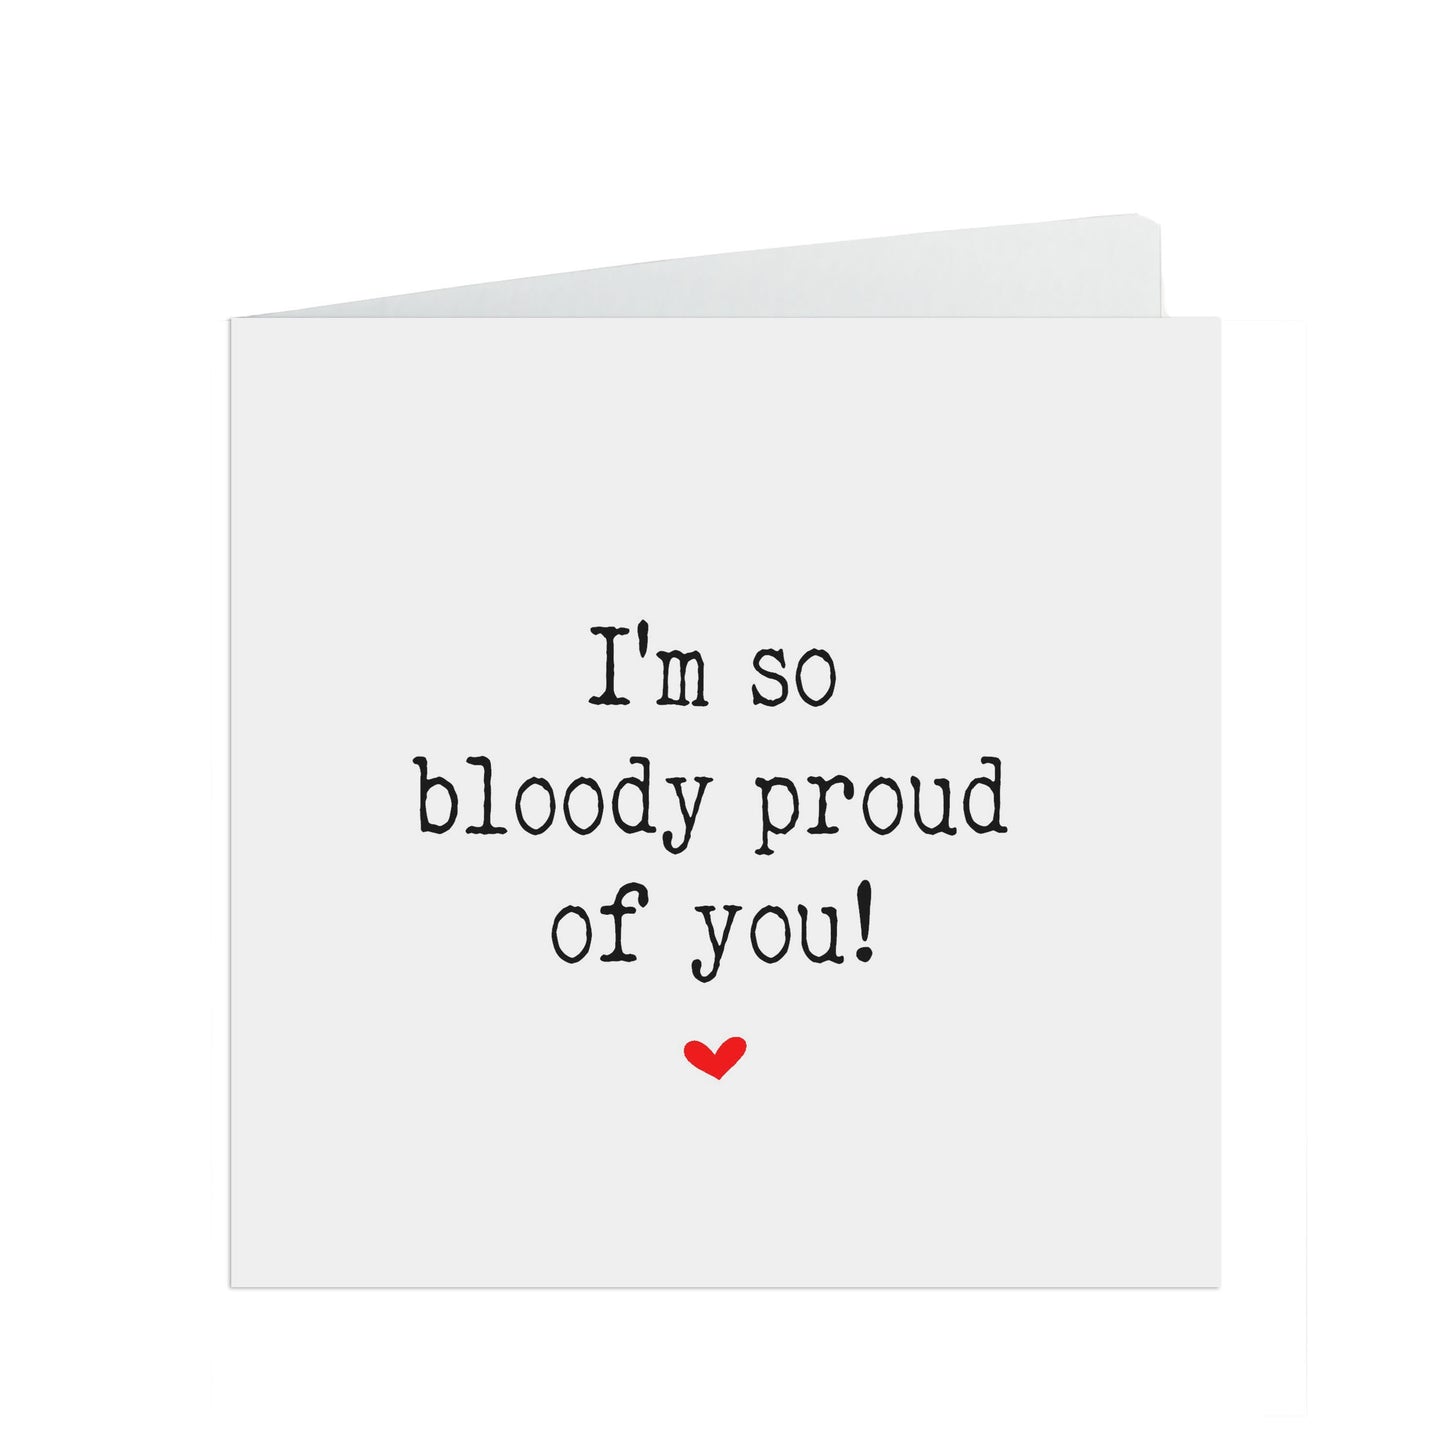 I'm so bloody proud of you! Motivation, encouragement or support card